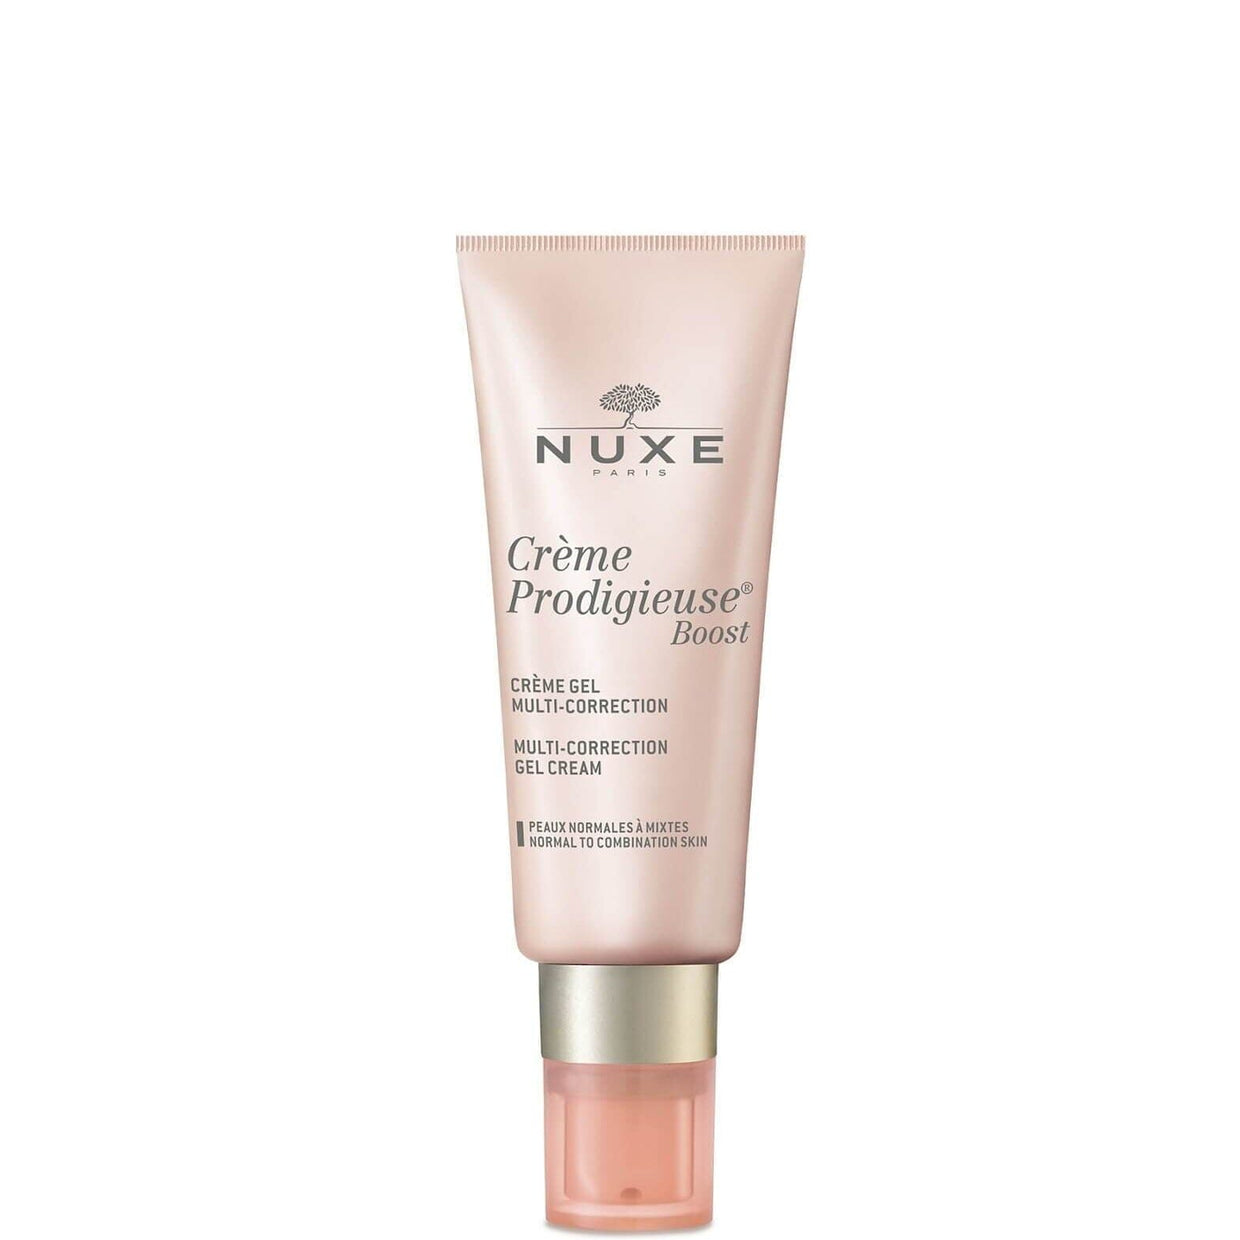 Nuxe Creme Prodigieuse Boost Multi-Correction Gel Cream Nuxe 40 ml Shop at Exclusive Beauty Club